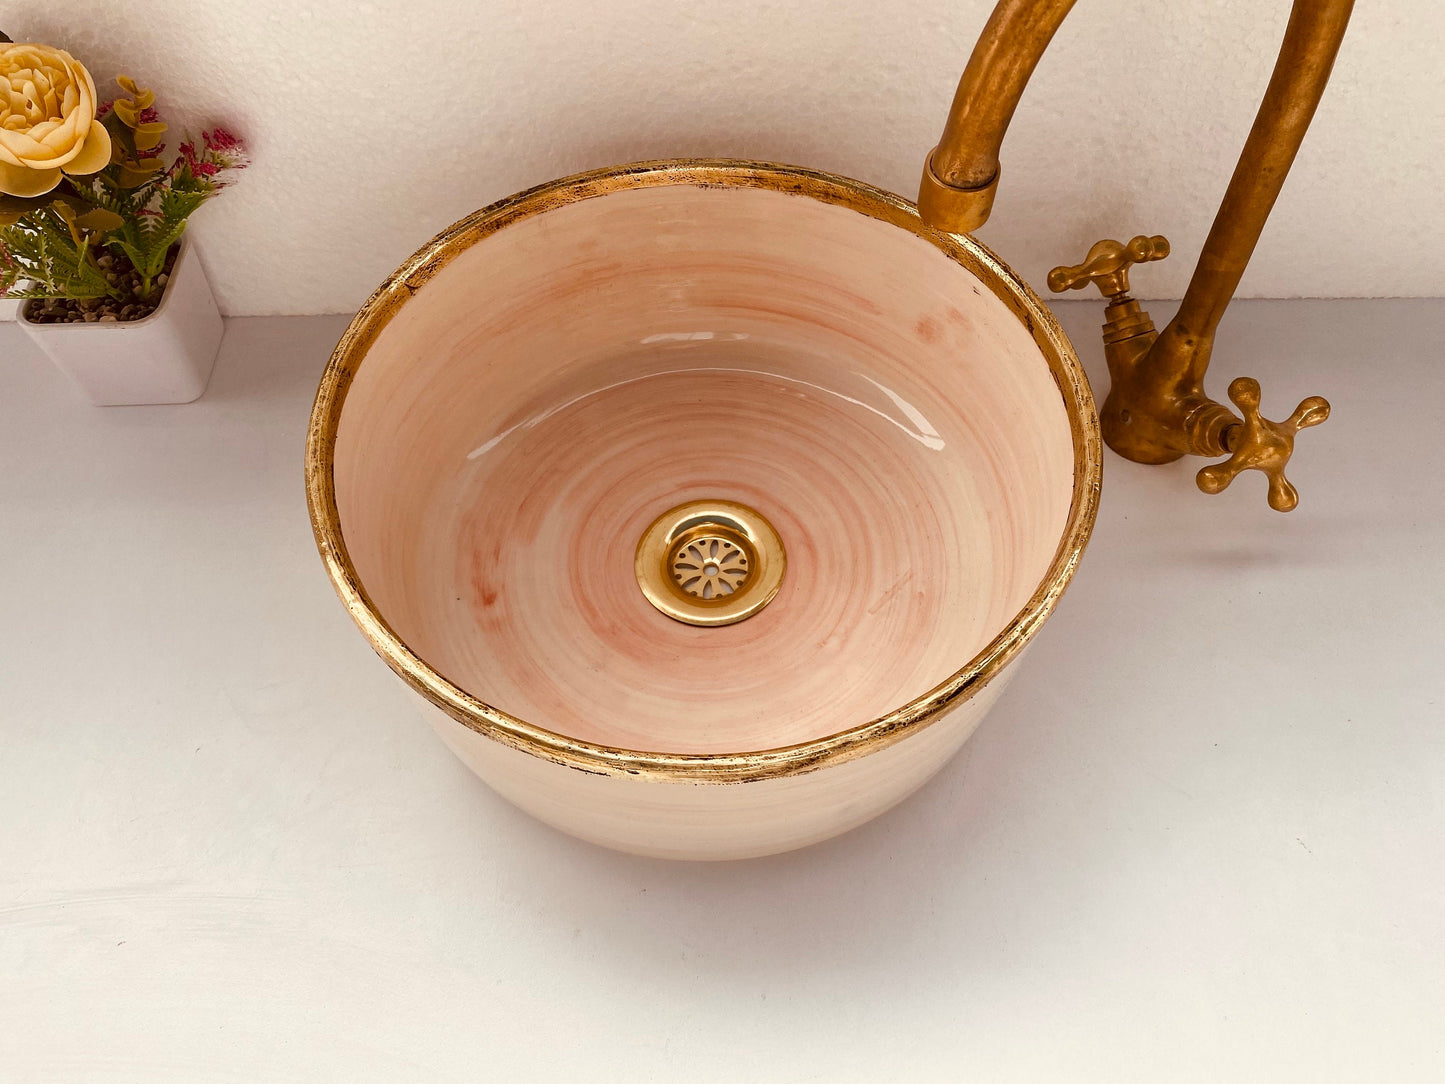 Pink Bathroom veseel sink Brushed Solid Brass Rimmed  -  washBasin with Mid-Century Modern  - Artisanal Farmhouse basin free gift with